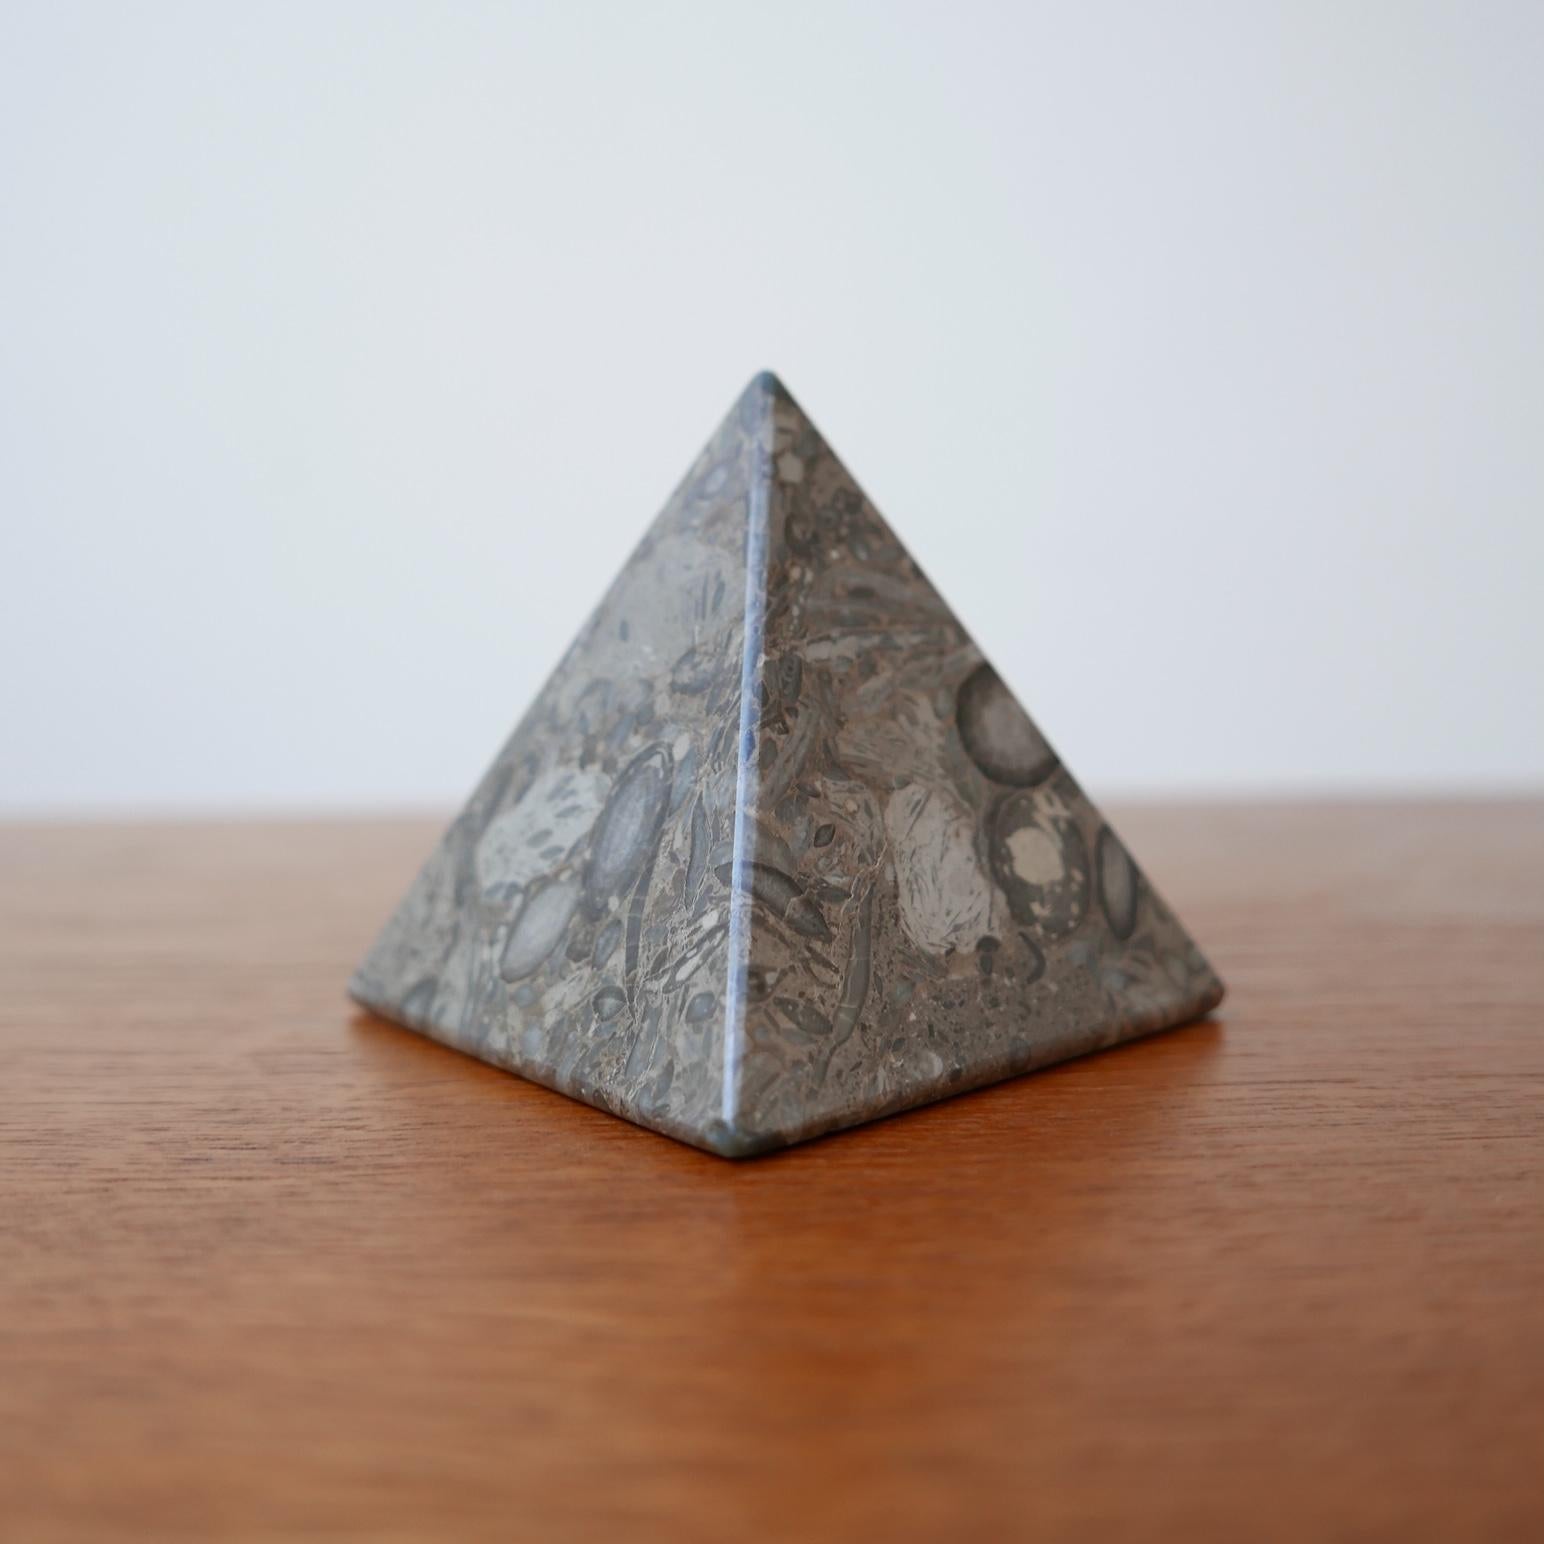 English Marble Stone Paperweight Pyramid Desk Curio 2